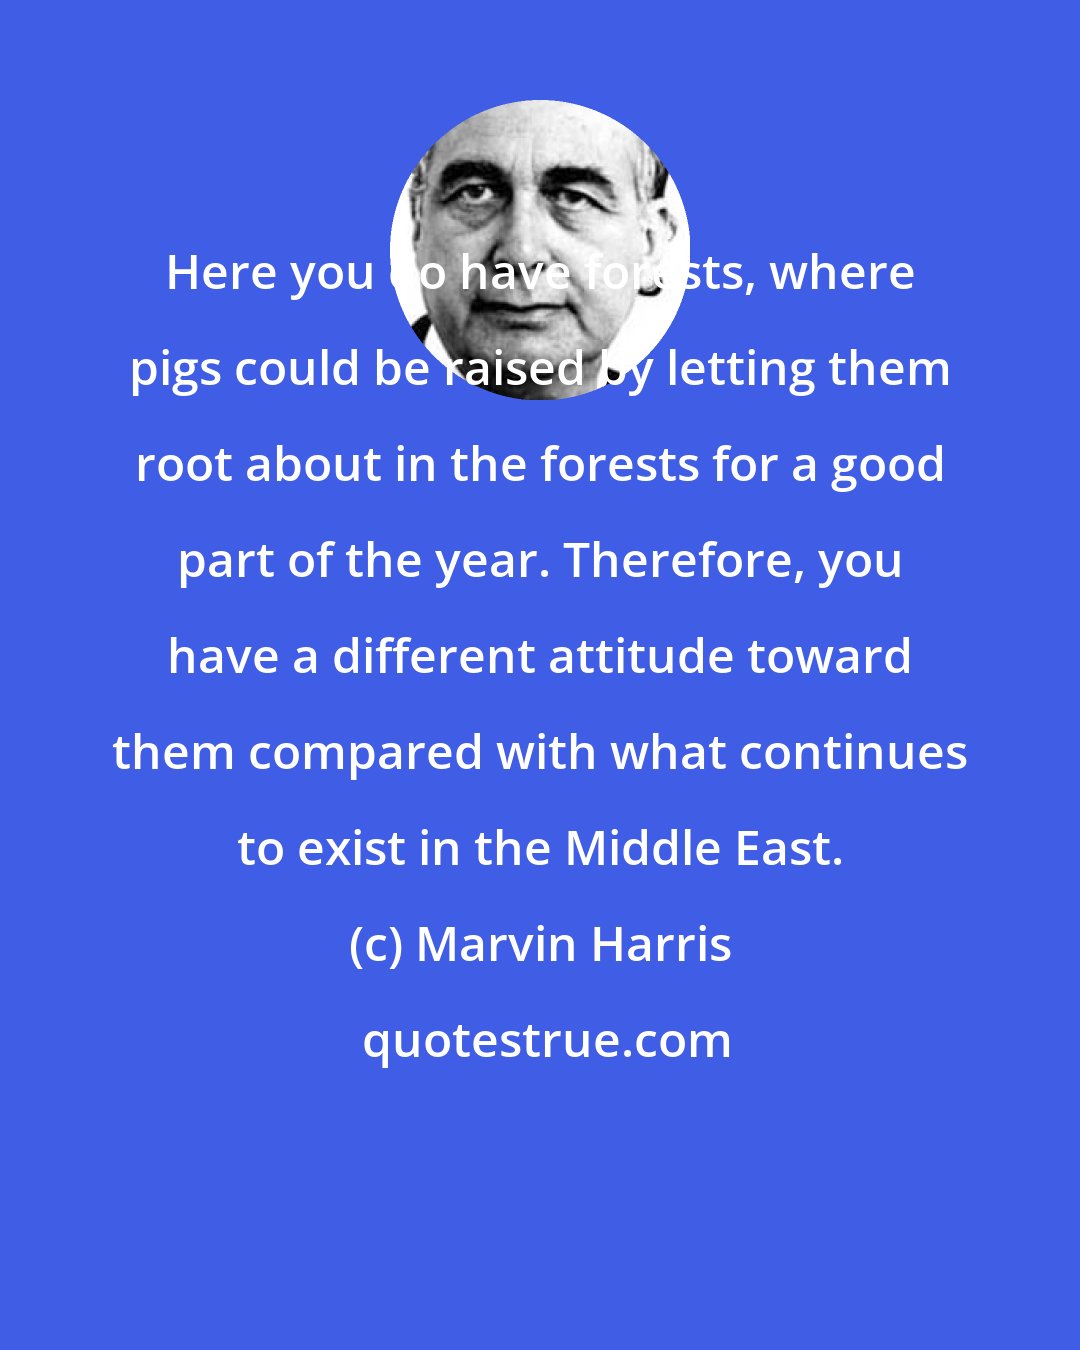 Marvin Harris: Here you do have forests, where pigs could be raised by letting them root about in the forests for a good part of the year. Therefore, you have a different attitude toward them compared with what continues to exist in the Middle East.